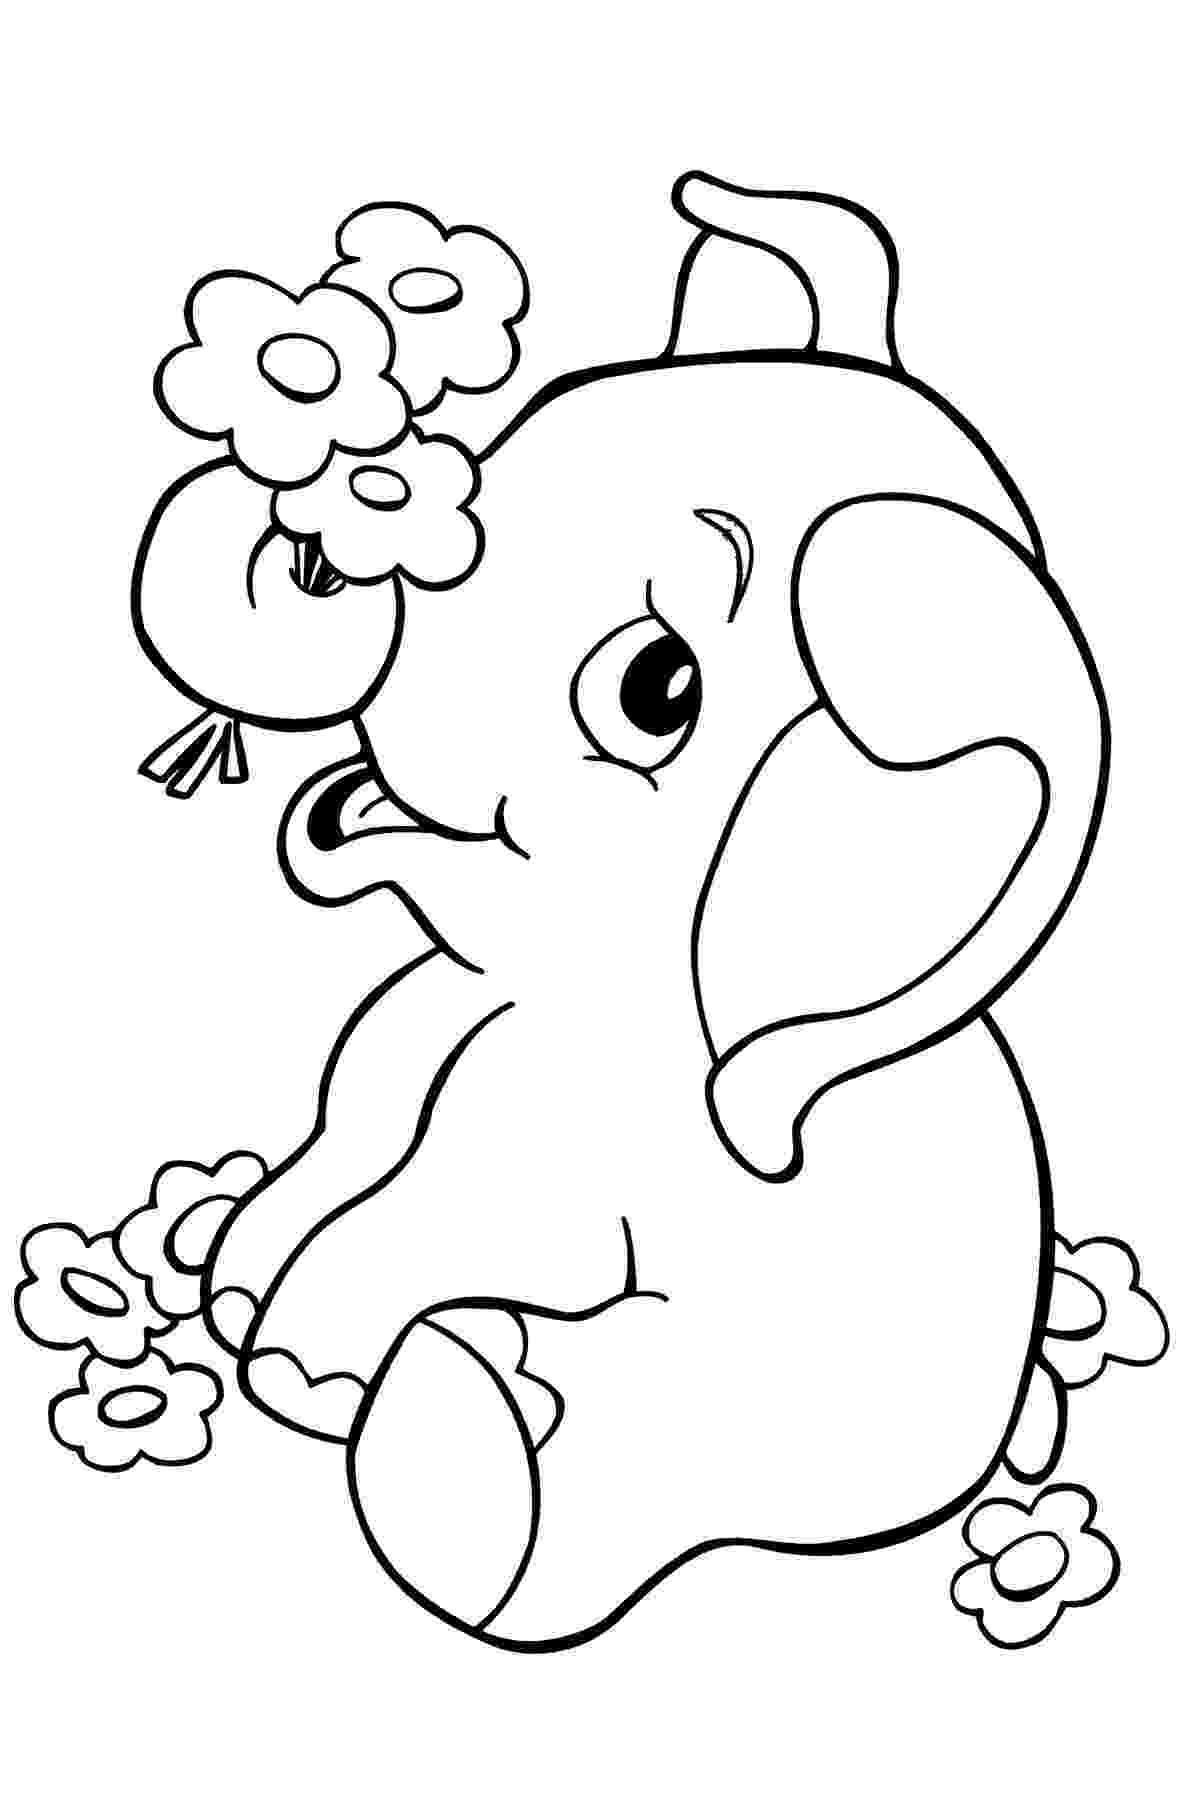 coloring pages jungle jungle book coloring pages to download and print for free jungle coloring pages 